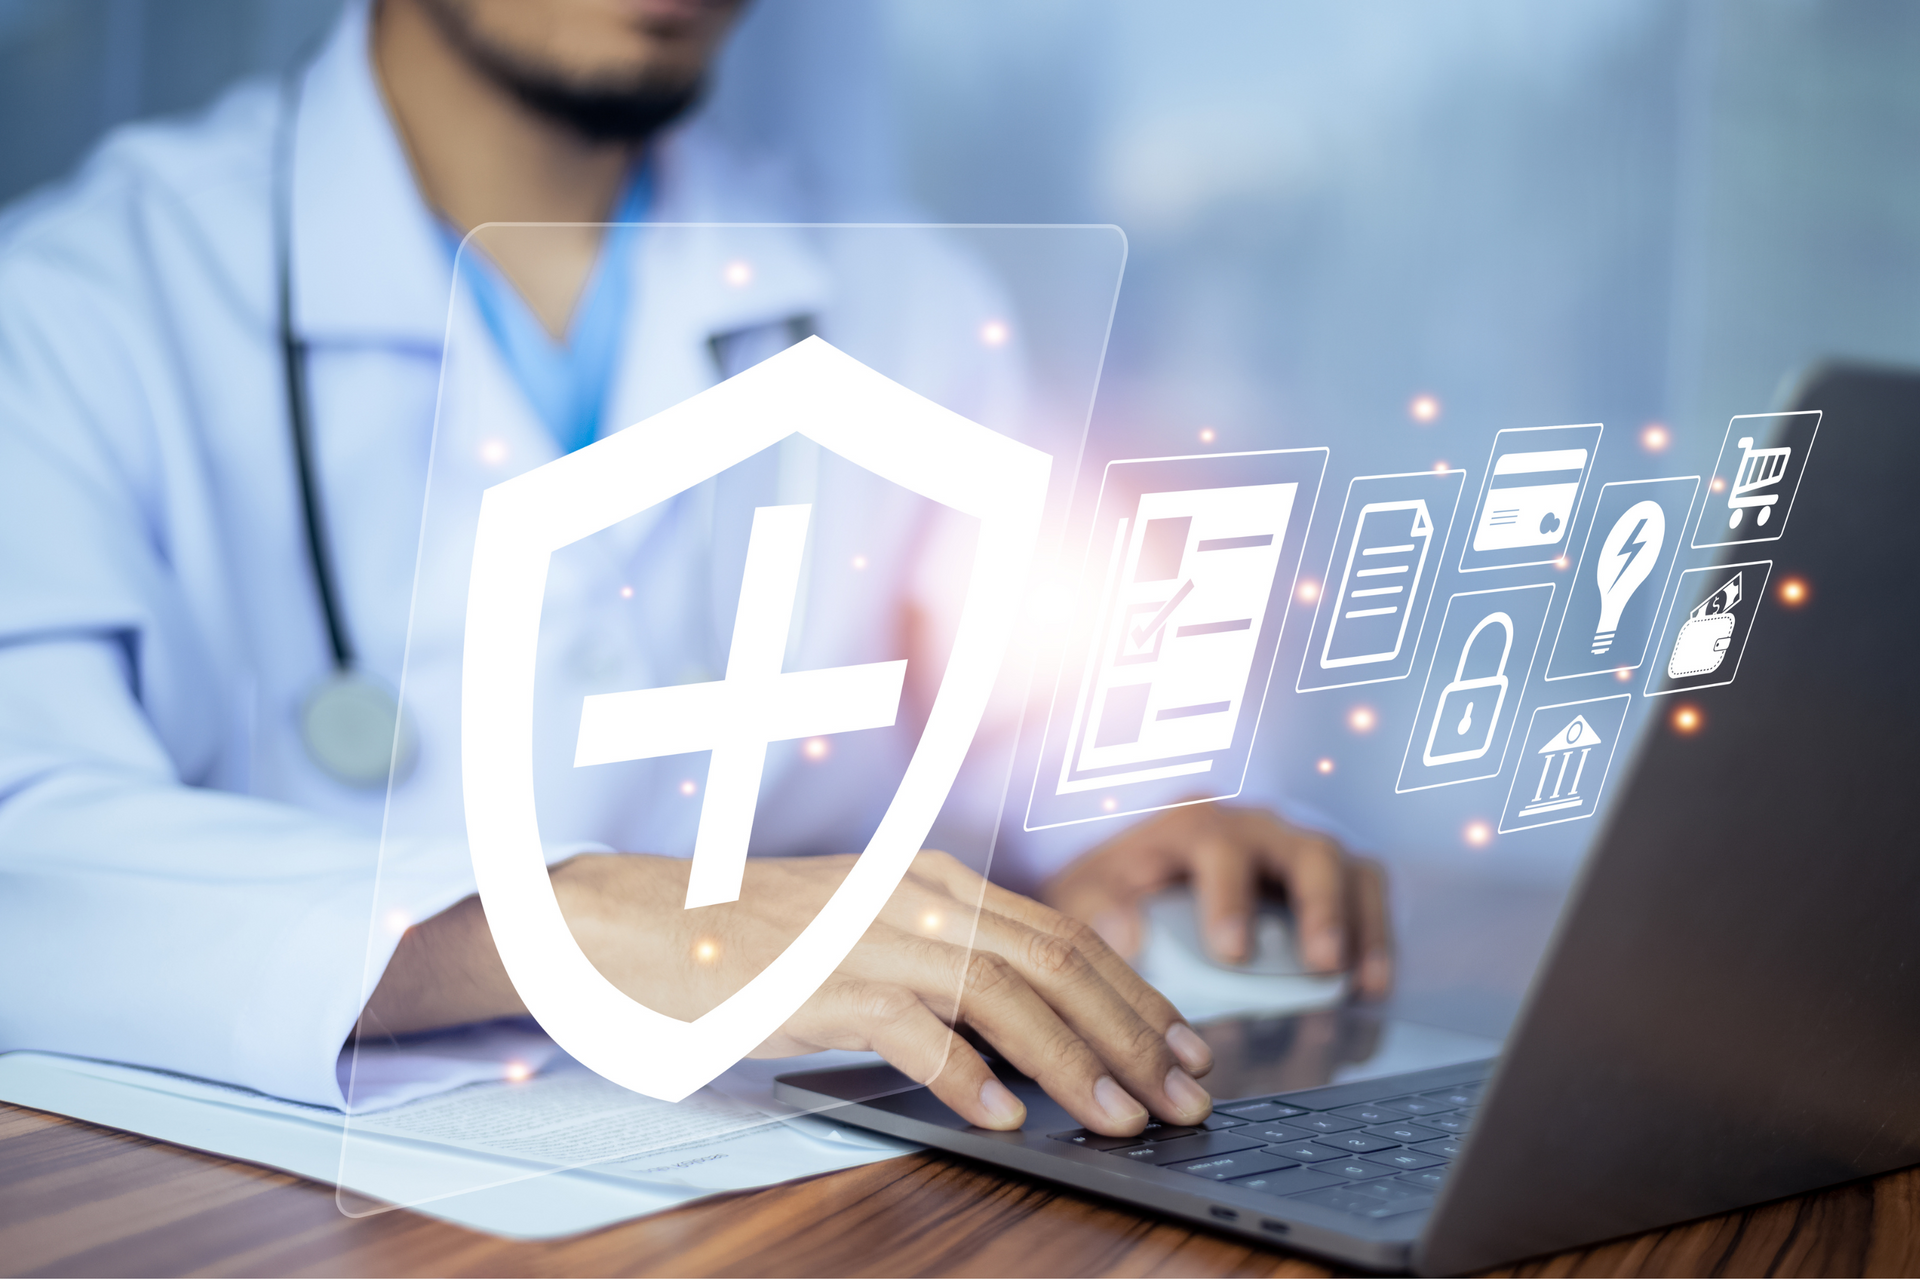 A close-up of a doctor navigating his web-based billing software on his laptop with a cybersecurity symbol superimposed.